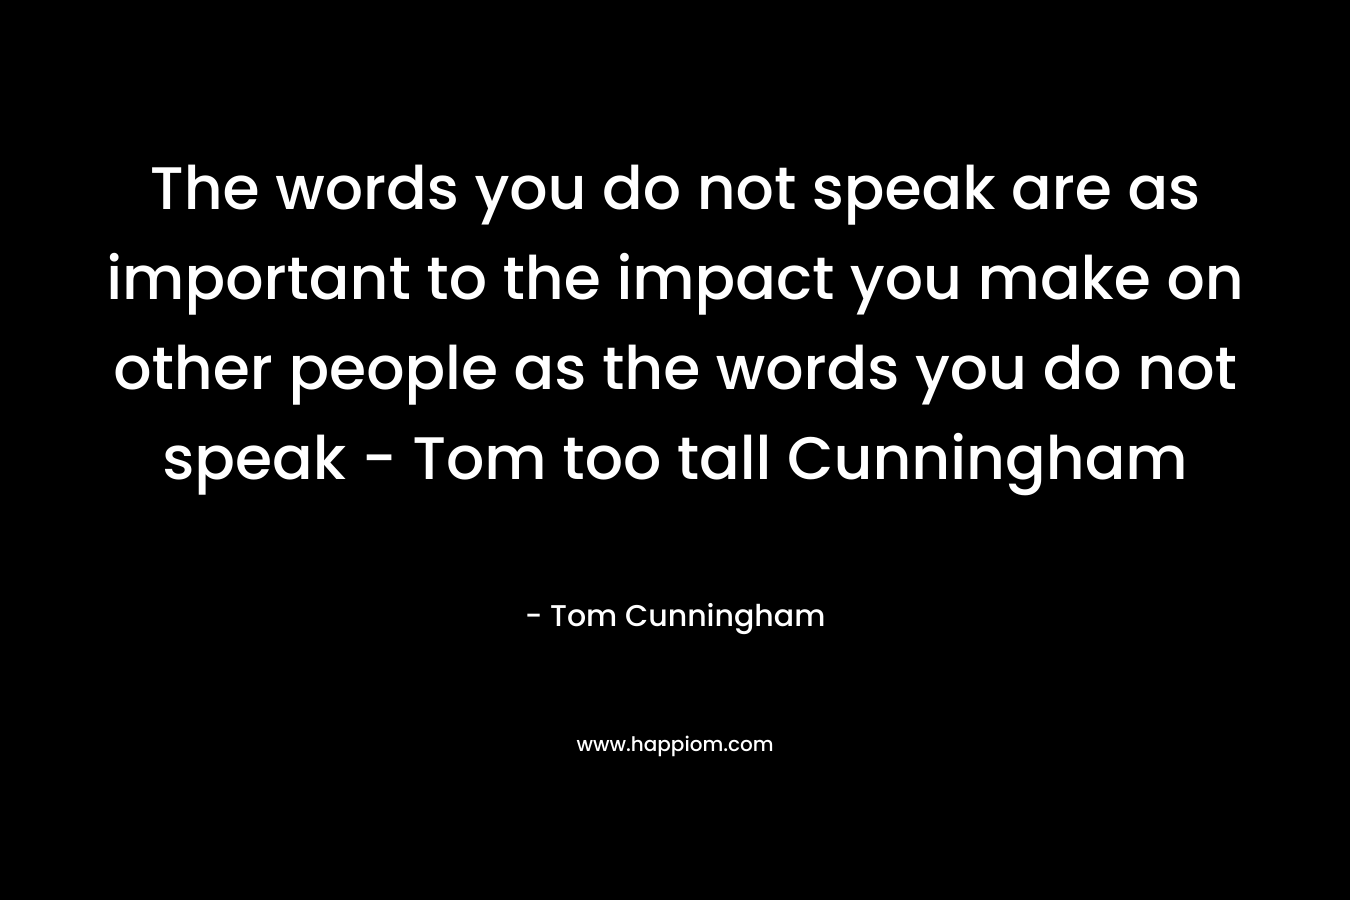 The words you do not speak are as important to the impact you make on other people as the words you do not speak - Tom too tall Cunningham